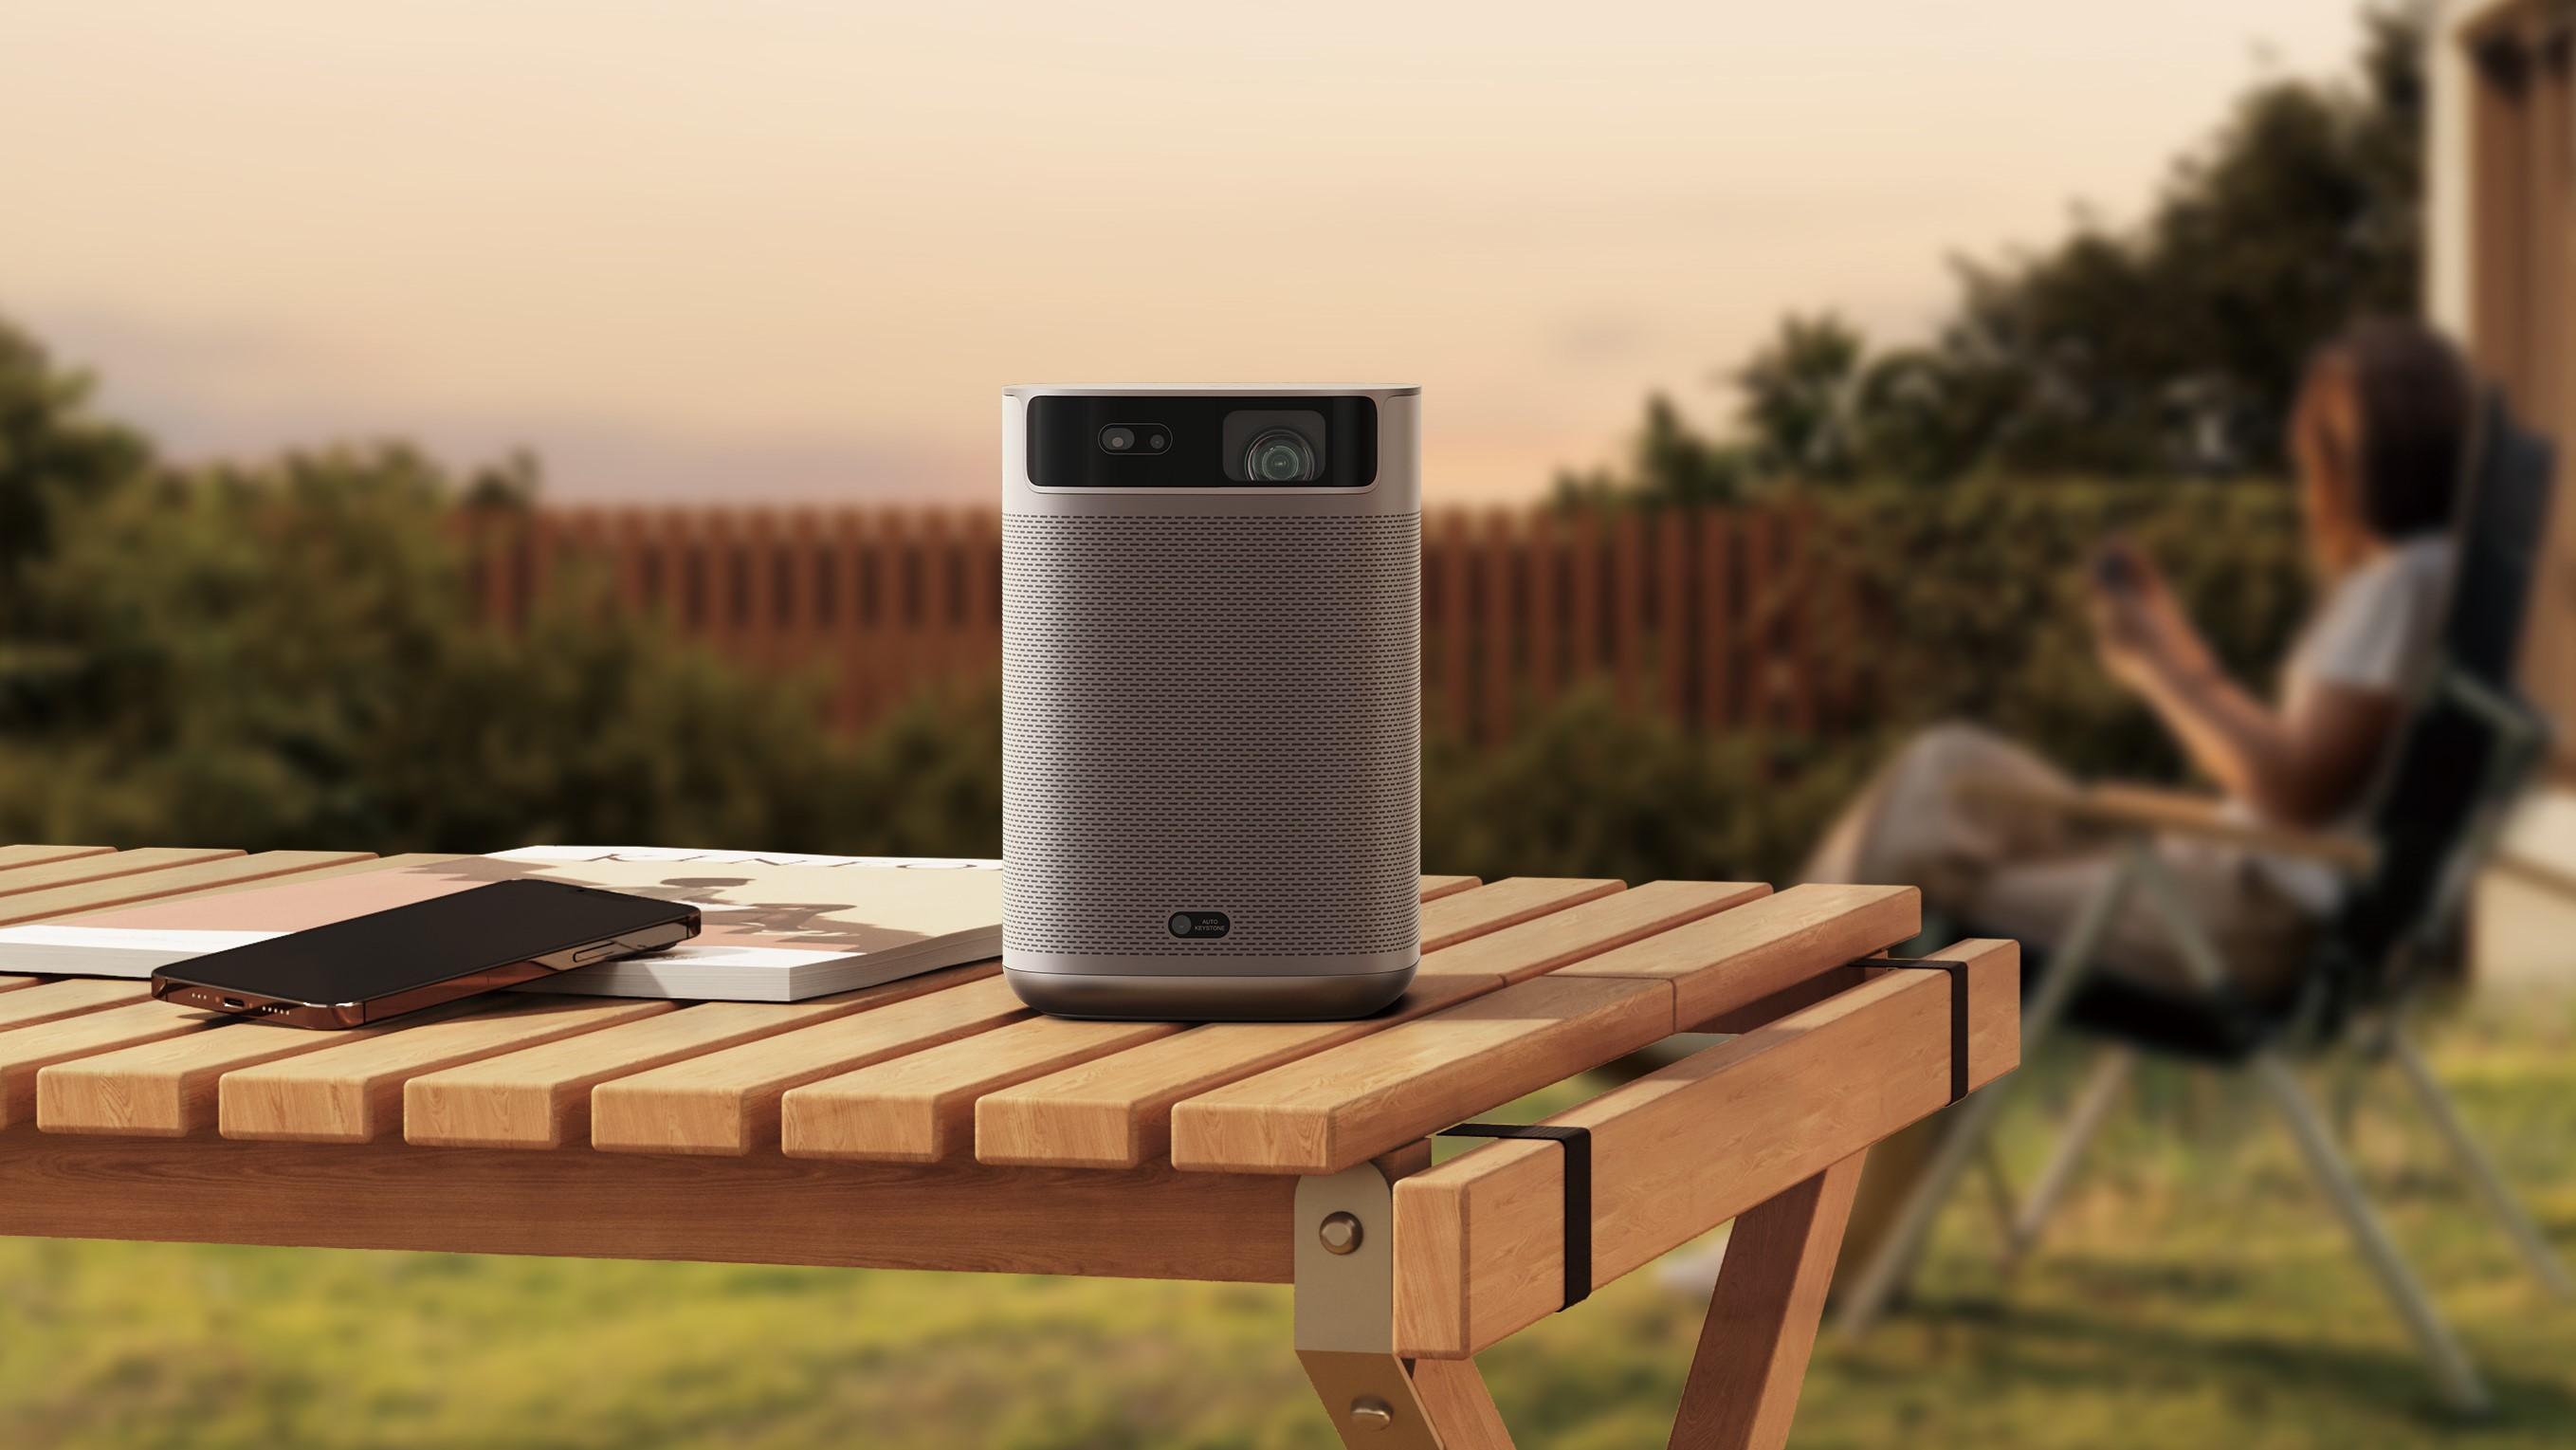 Xgimi MoGo 2 Pro on table outdoors with trees in the background